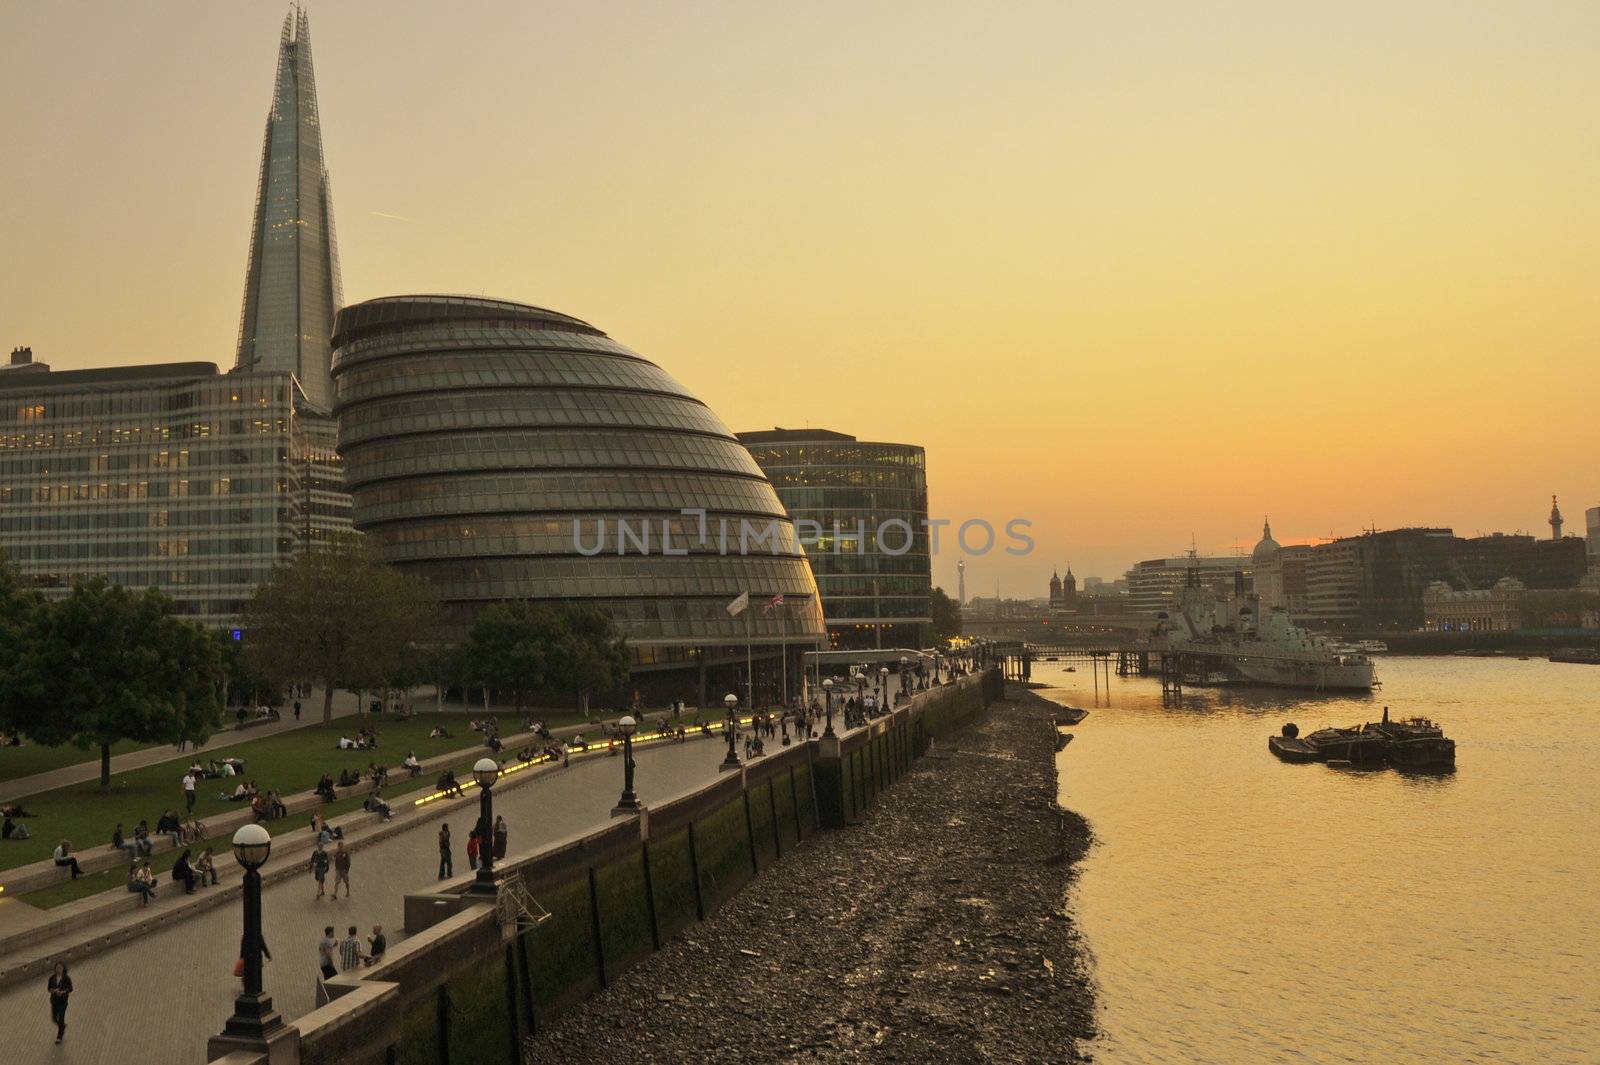 London City Hall, the Shard and surrounding buildings along the River Thames at sunset